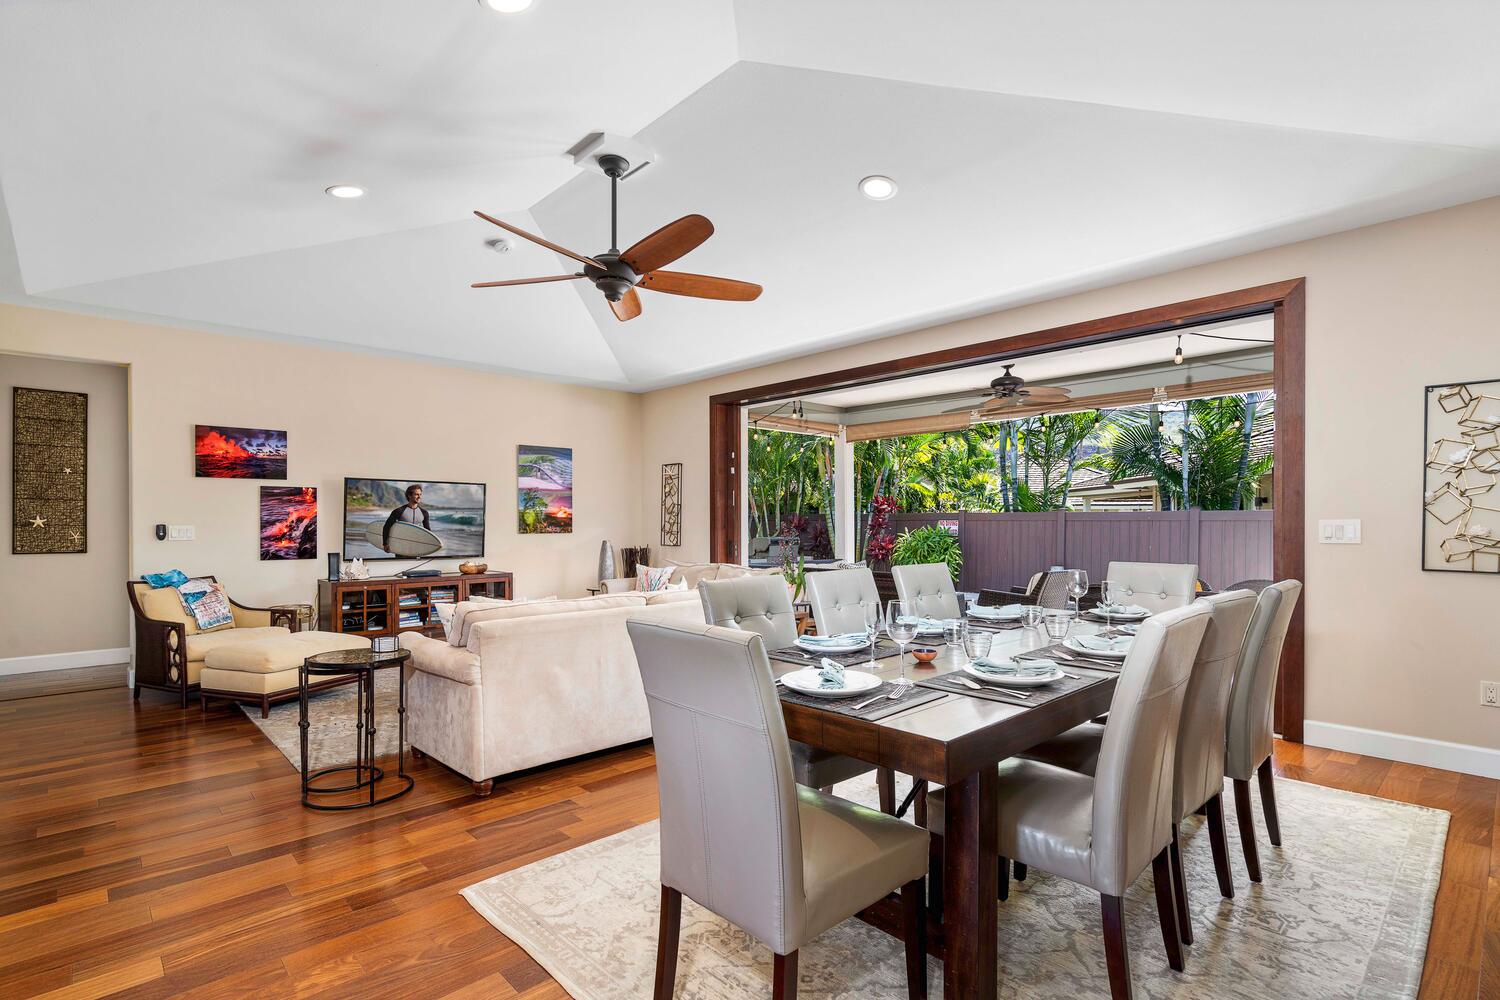 Kailua Kona Vacation Rentals, Holua Kai #32 - This bright and airy custom home features central air conditioning, along with plenty of windows strategically placed to let refreshing island breezes blow through.